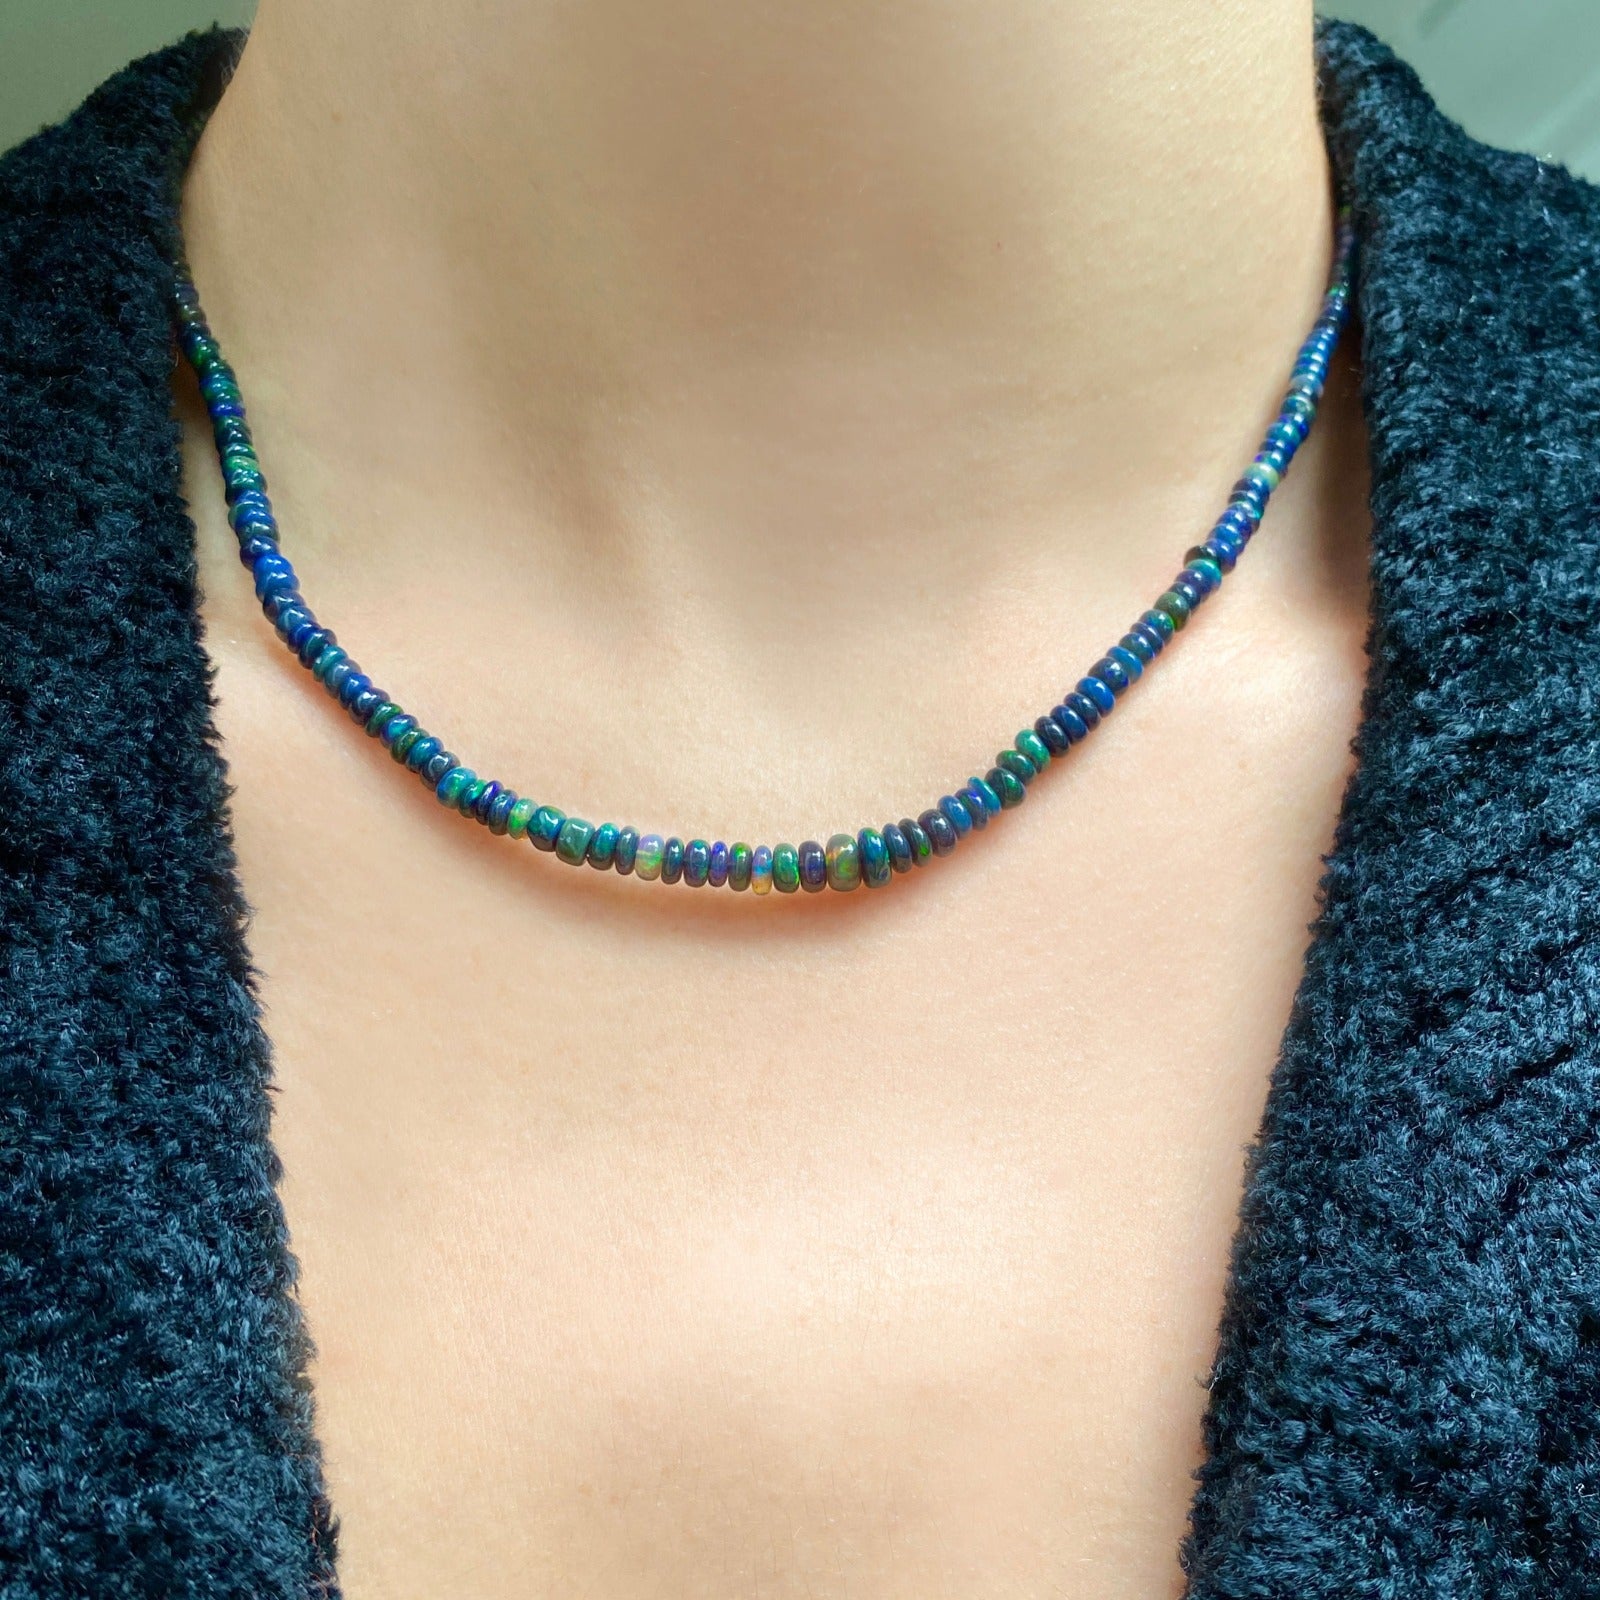 Shimmering beaded necklace made of smooth opal rondels in shades of black, navy, and green on a slim gold lobster clasp.